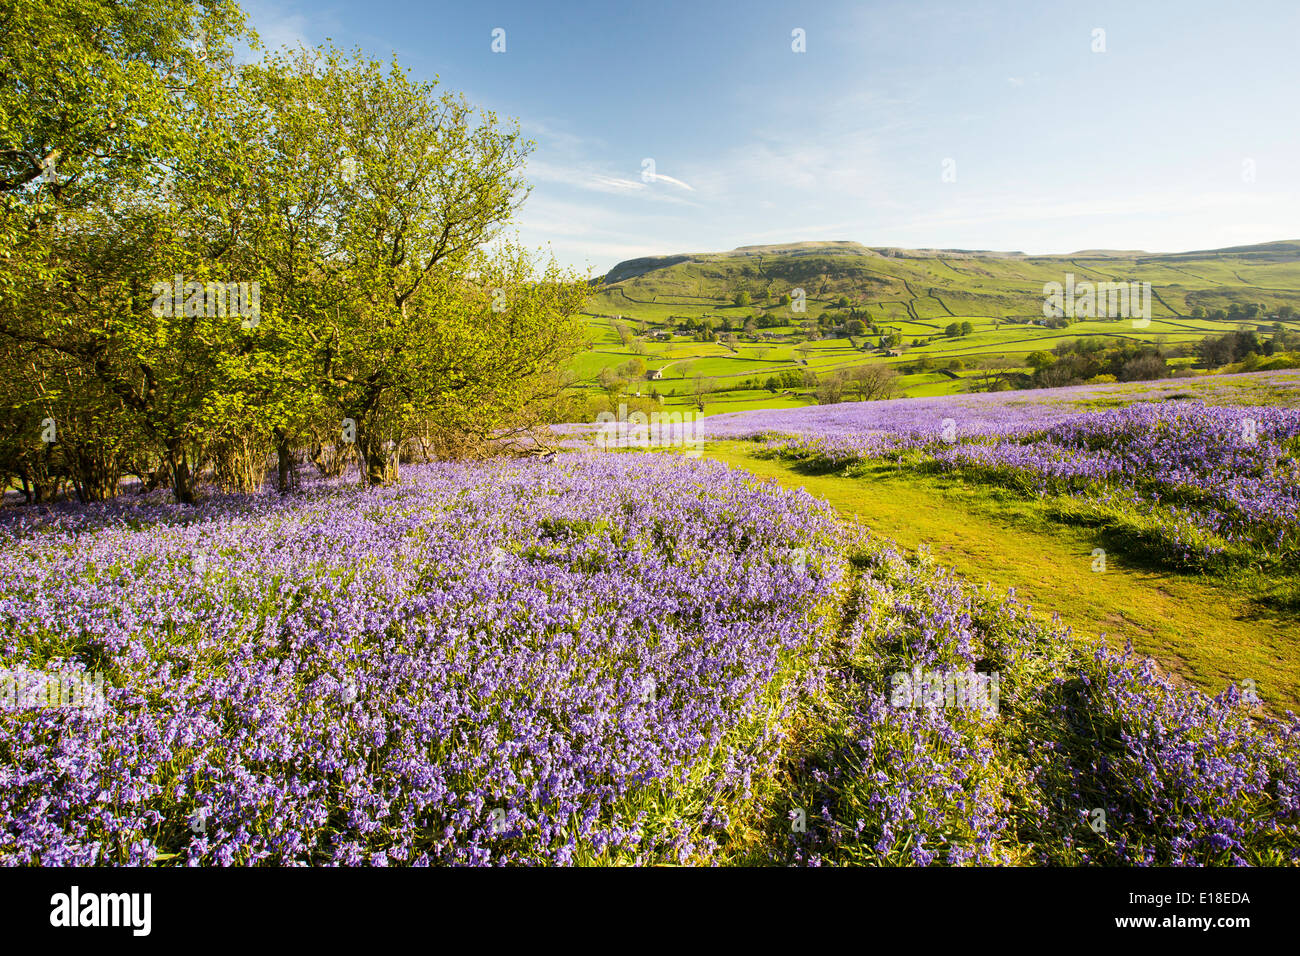 Bluebells growing on a limestone hill in the Yorkshire Dales National Park, UK. Stock Photo